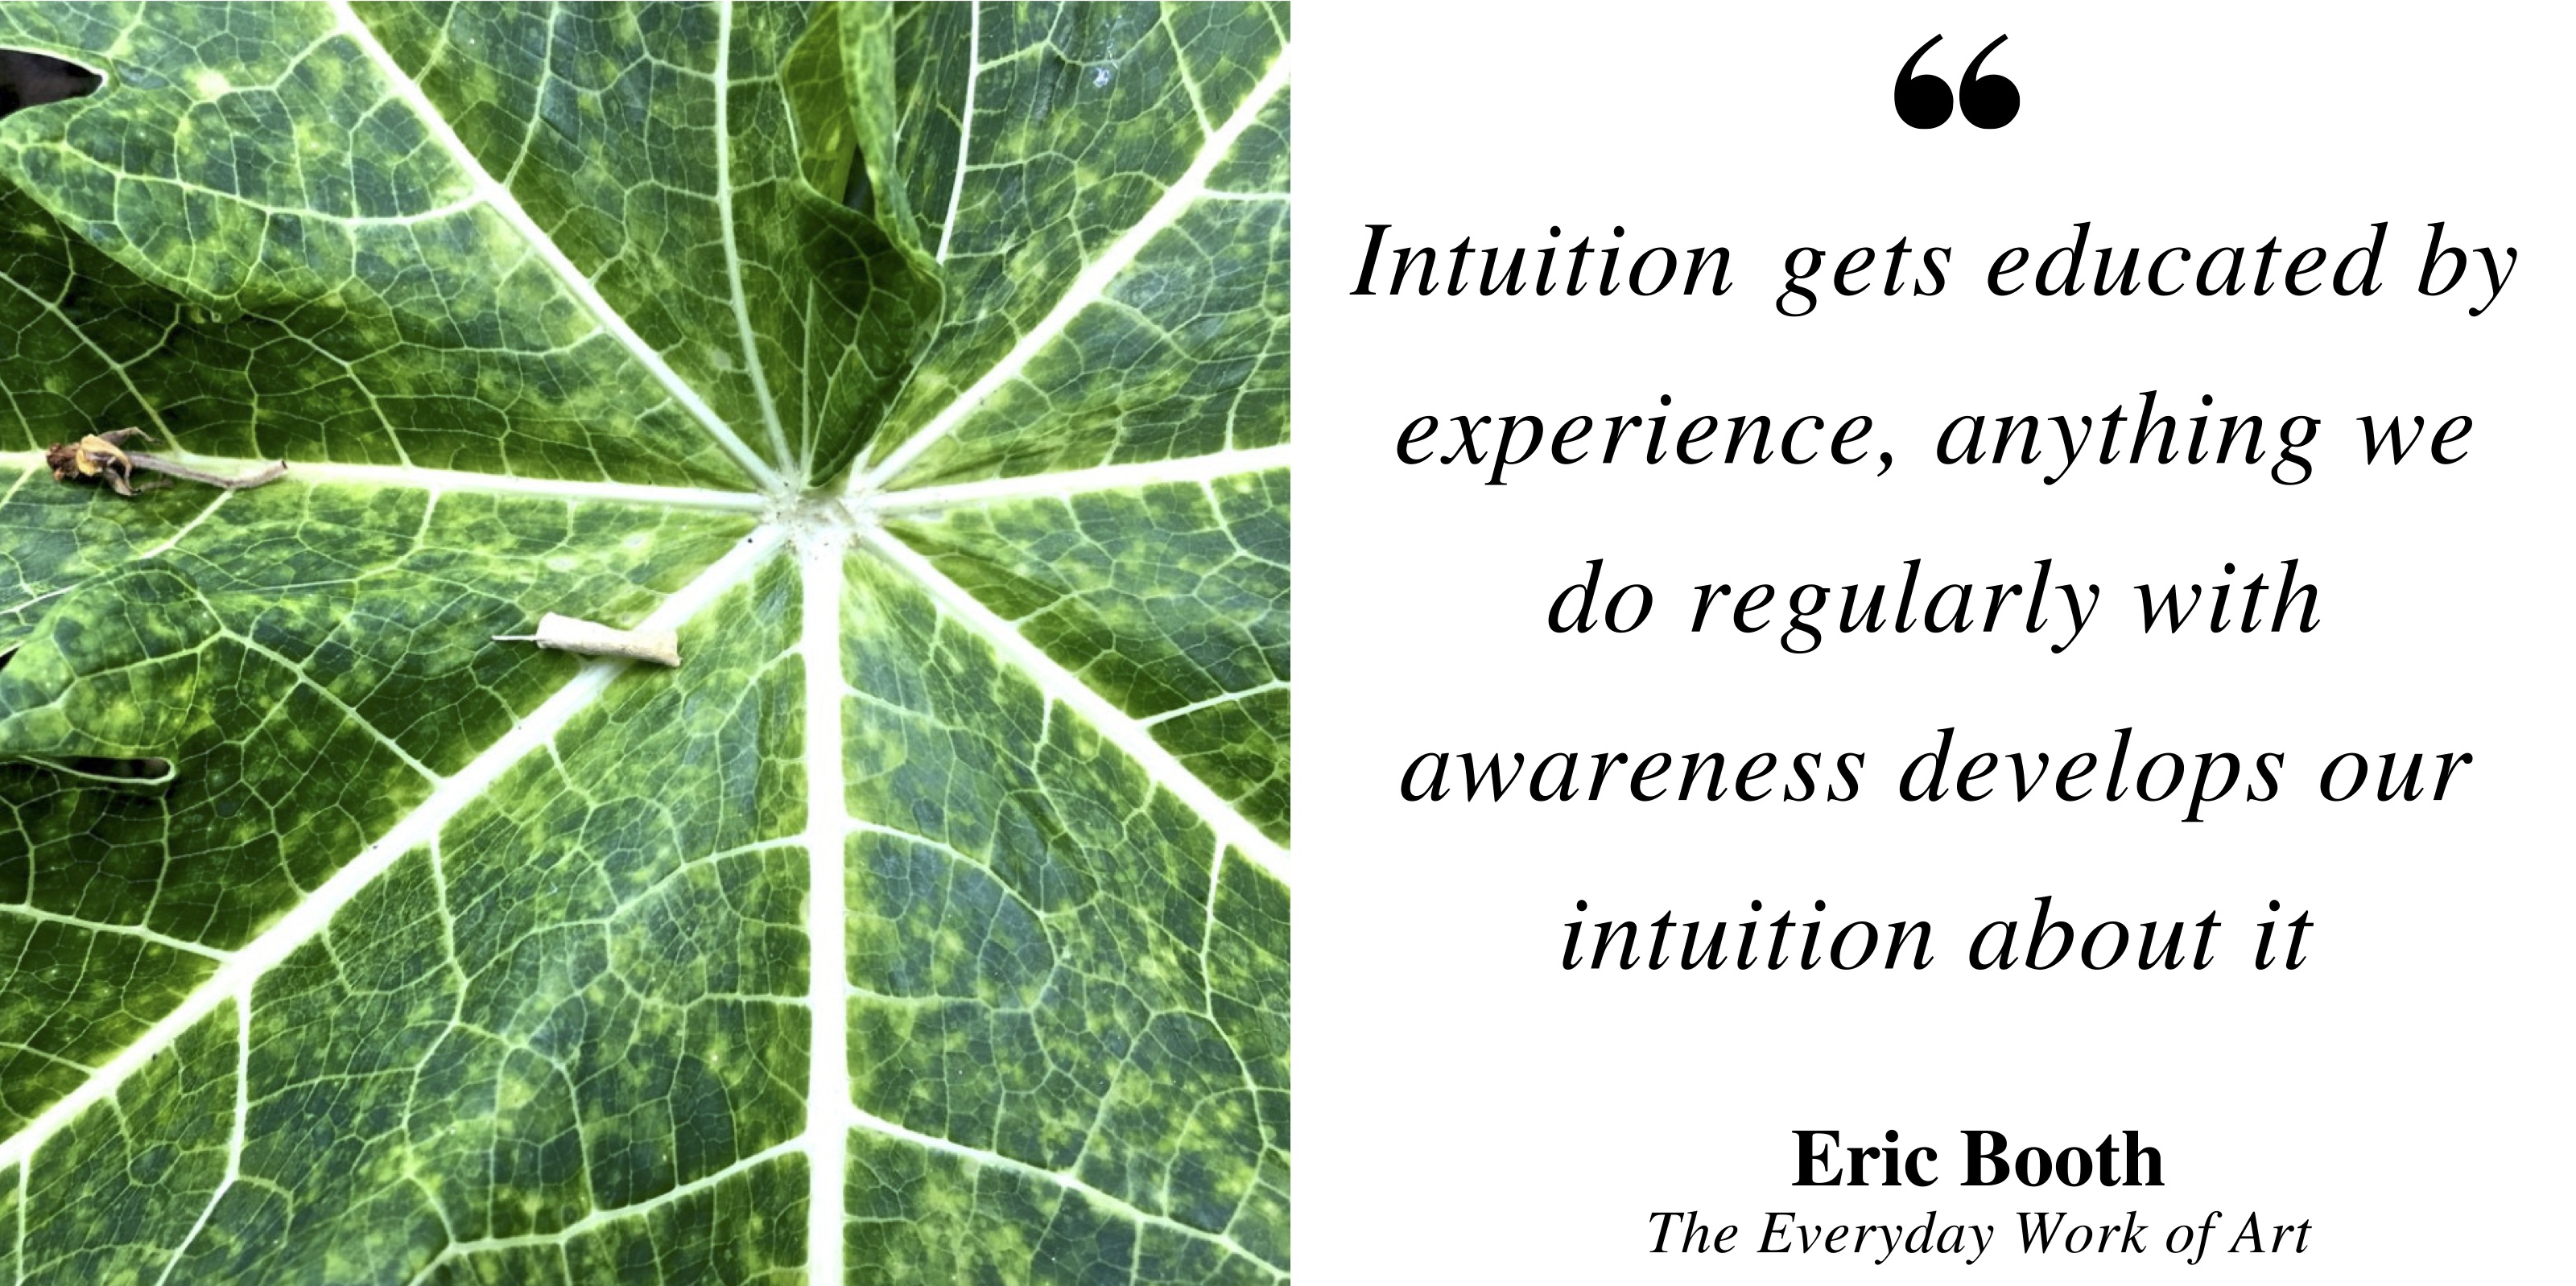 Developing intuition